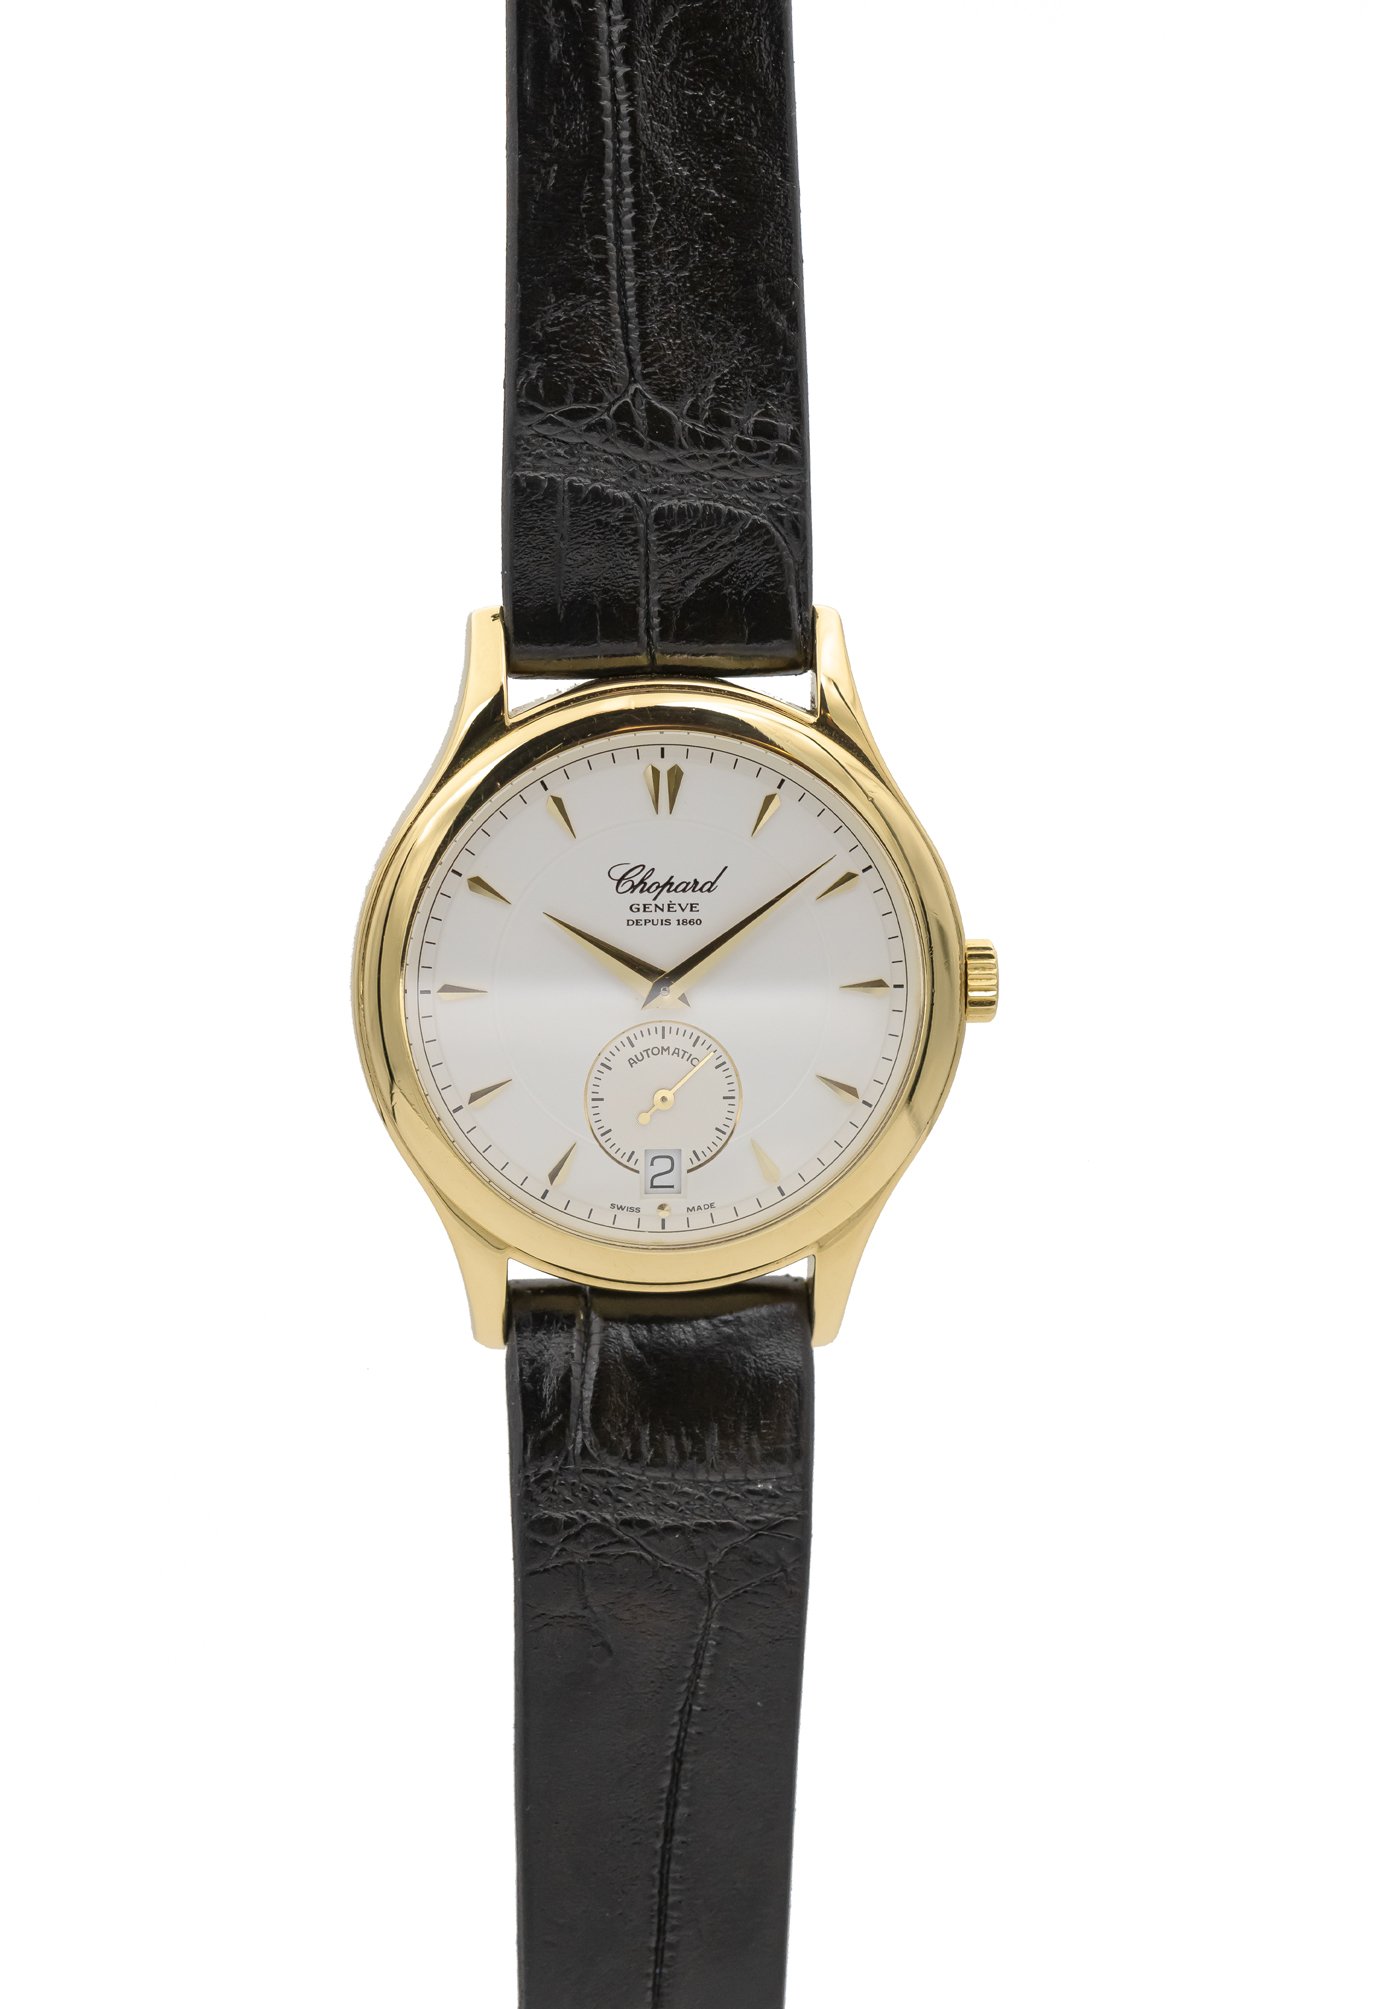 The Hour Glass' Edition Chopard LUC 16/1860/1018